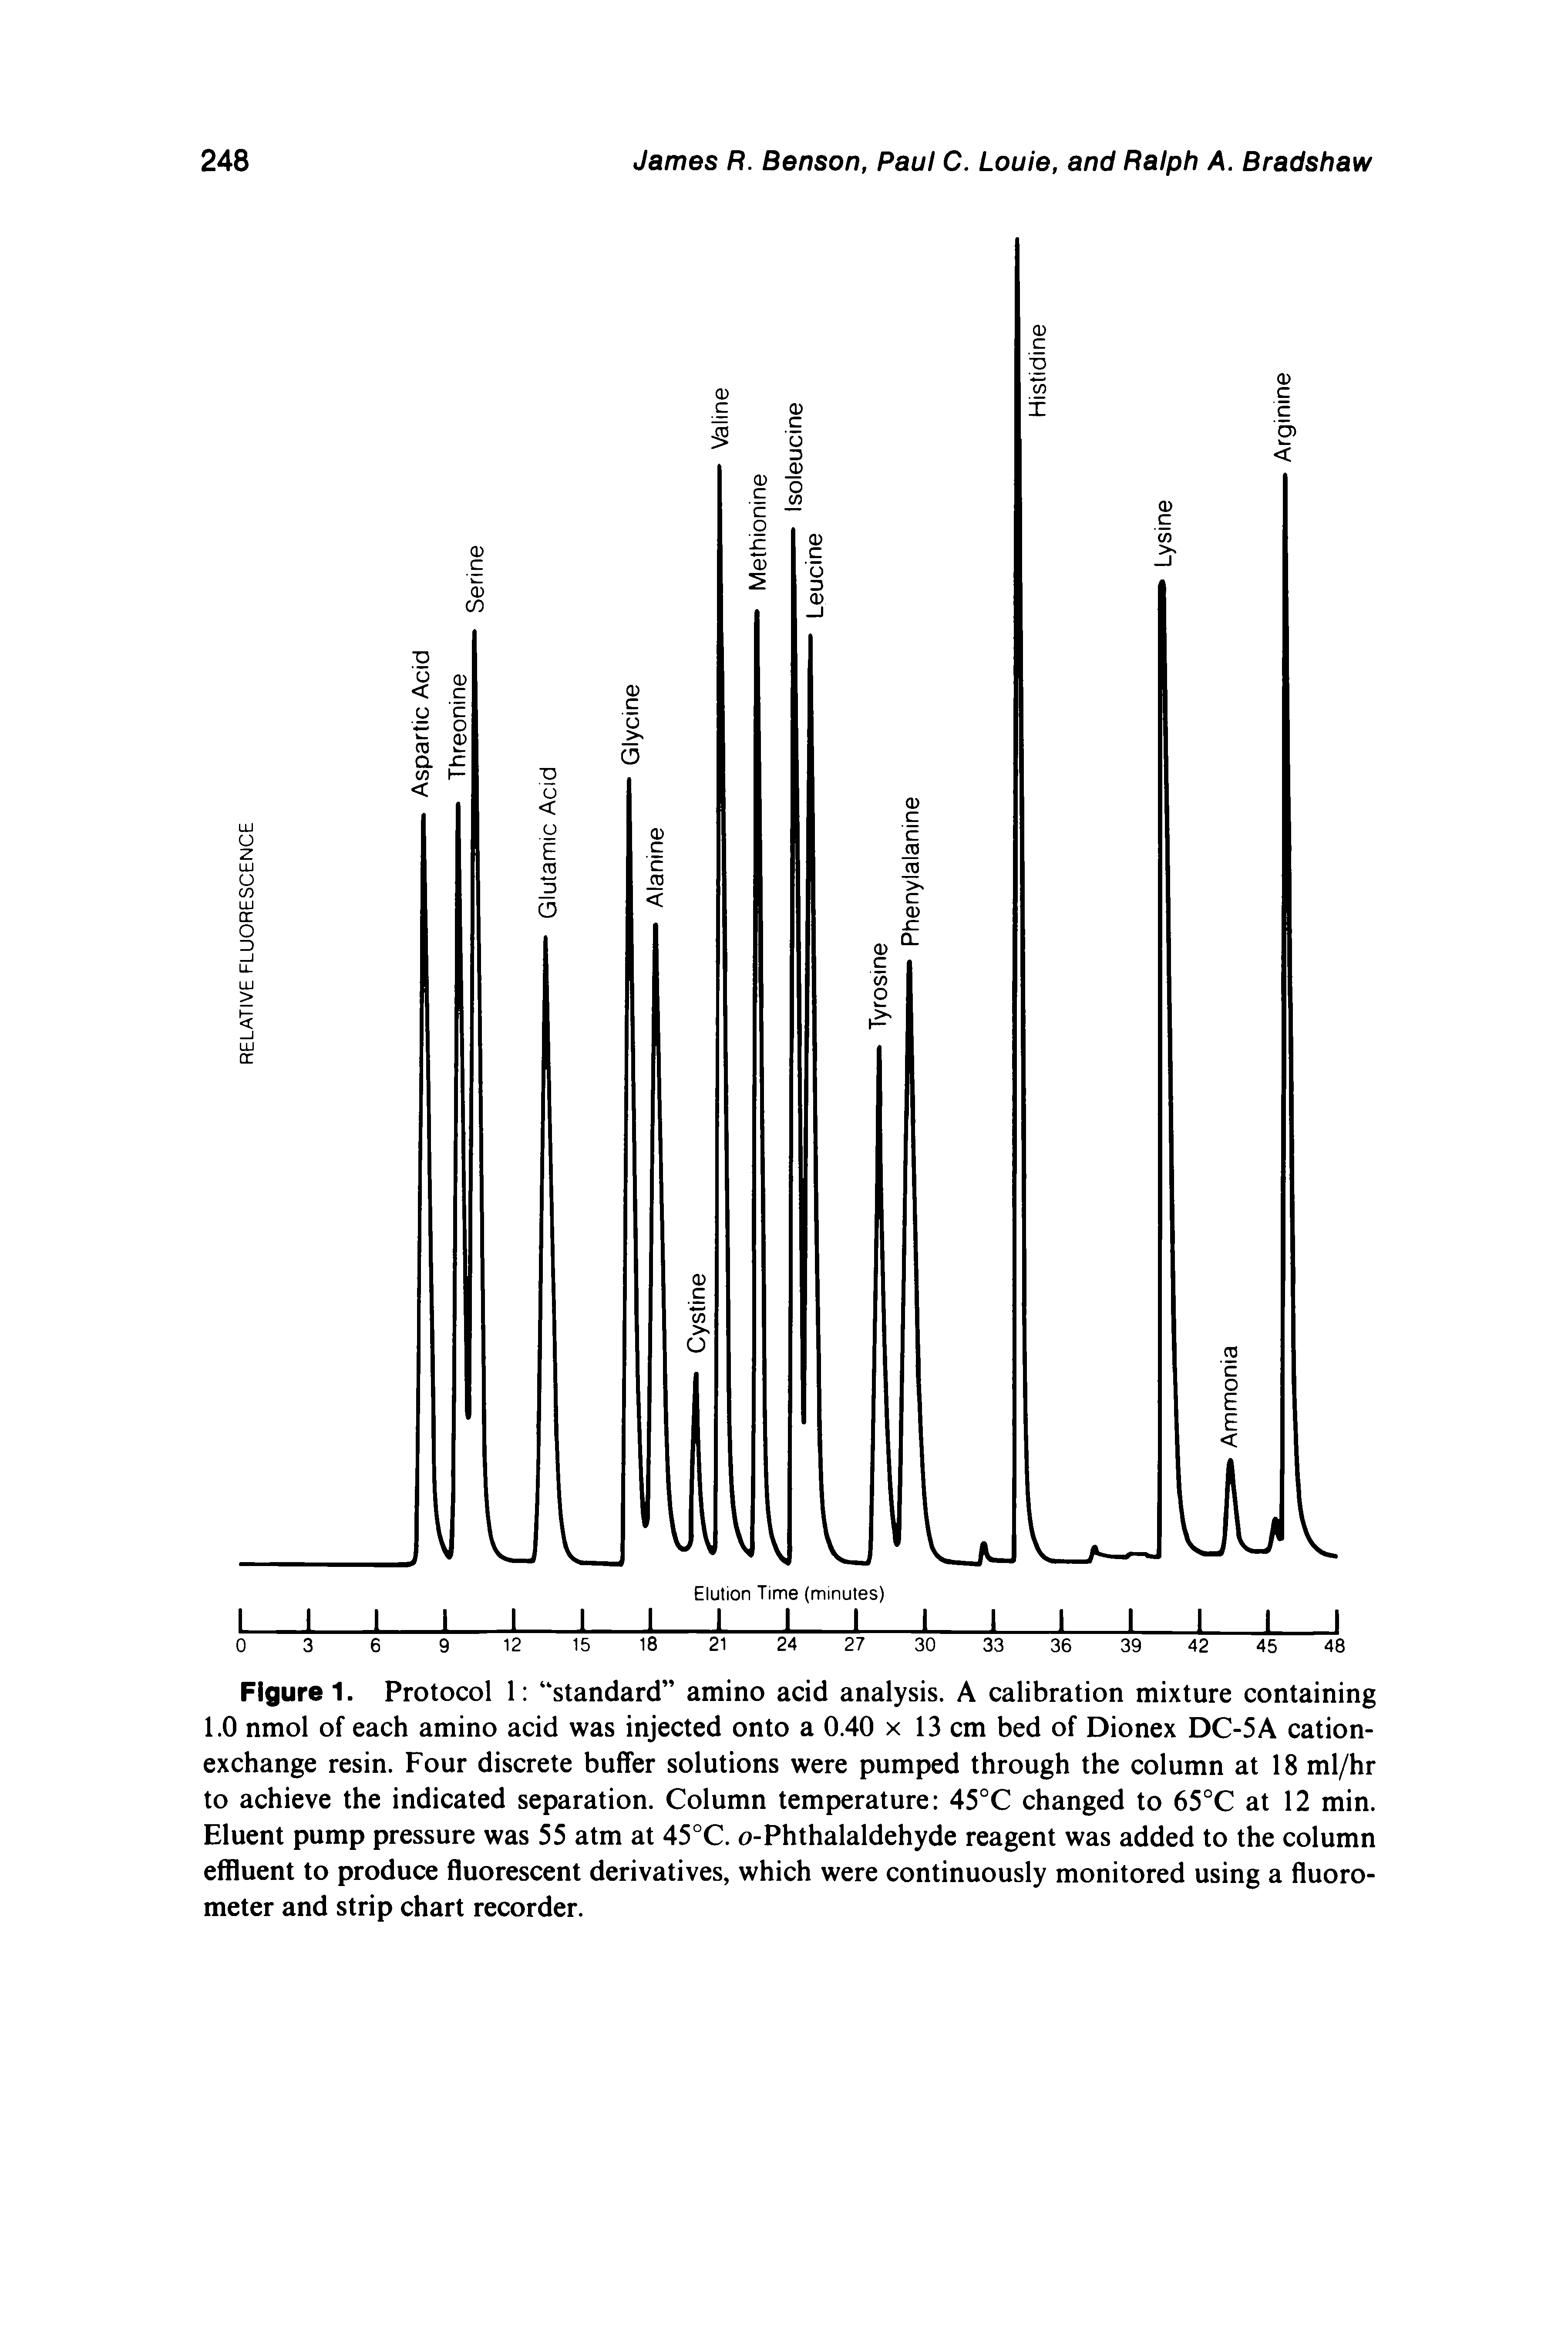 Figure 1. Protocol 1 standard amino acid analysis. A calibration mixture containing 1.0 nmol of each amino acid was injected onto a 0.40 x 13 cm bed of Dionex DC-5 A cation-exchange resin. Four discrete buffer solutions were pumped through the column at 18 ml/hr to achieve the indicated separation. Column temperature 45°C changed to 65°C at 12 min. Eluent pump pressure was 55 atm at 45°C. o-Phthalaldehyde reagent was added to the column effluent to produce fluorescent derivatives, which were continuously monitored using a fluoro-meter and strip chart recorder.